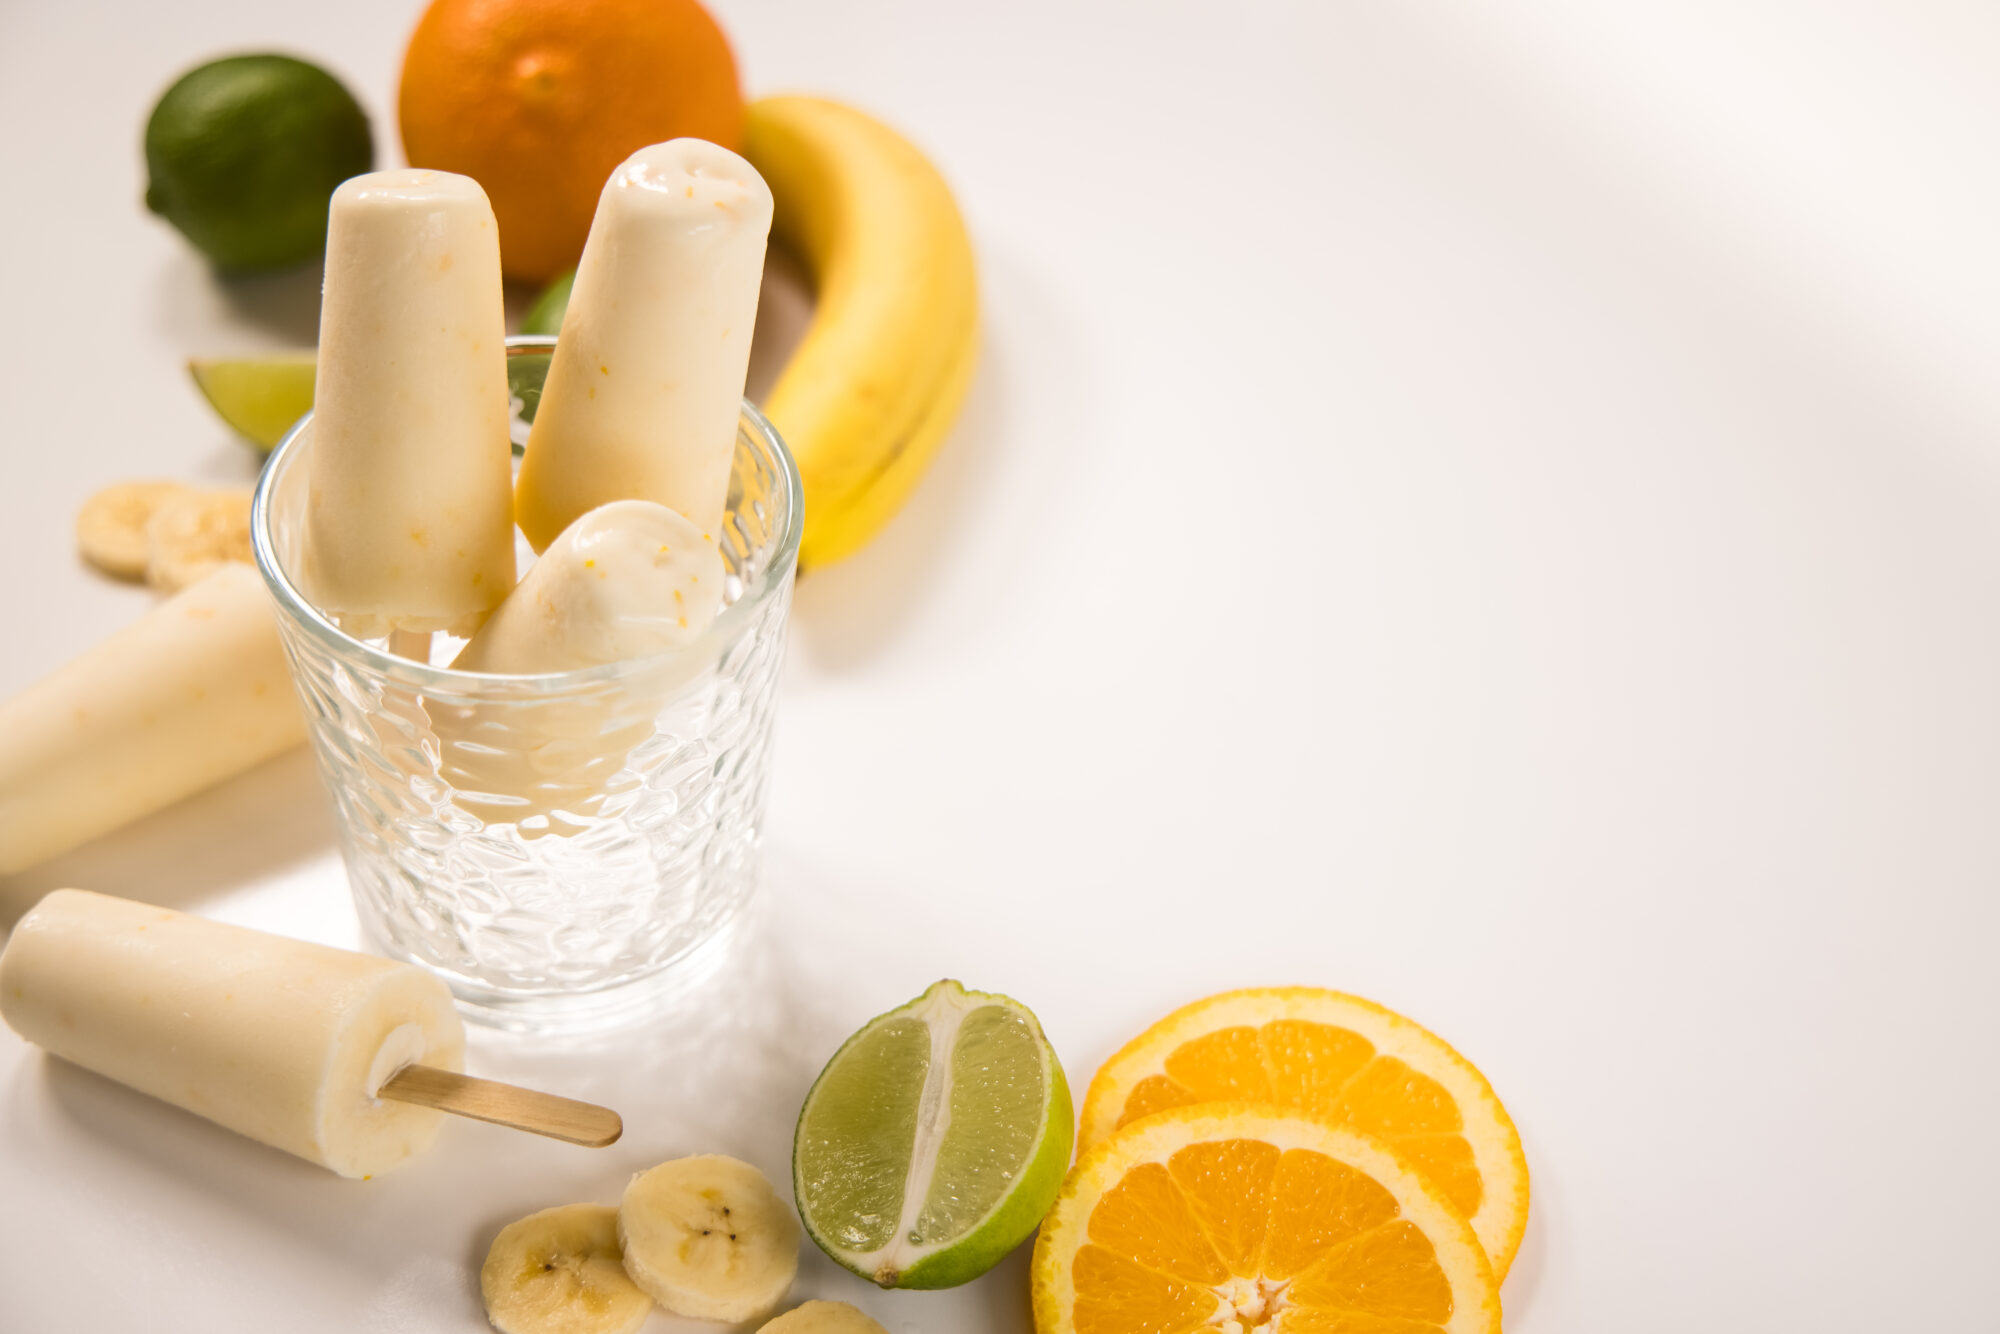 Top view - Three Banana Daquiri popsicles in a glass jar with two more laying to the side. Slices of bananas, oranges and limes surround the jar.